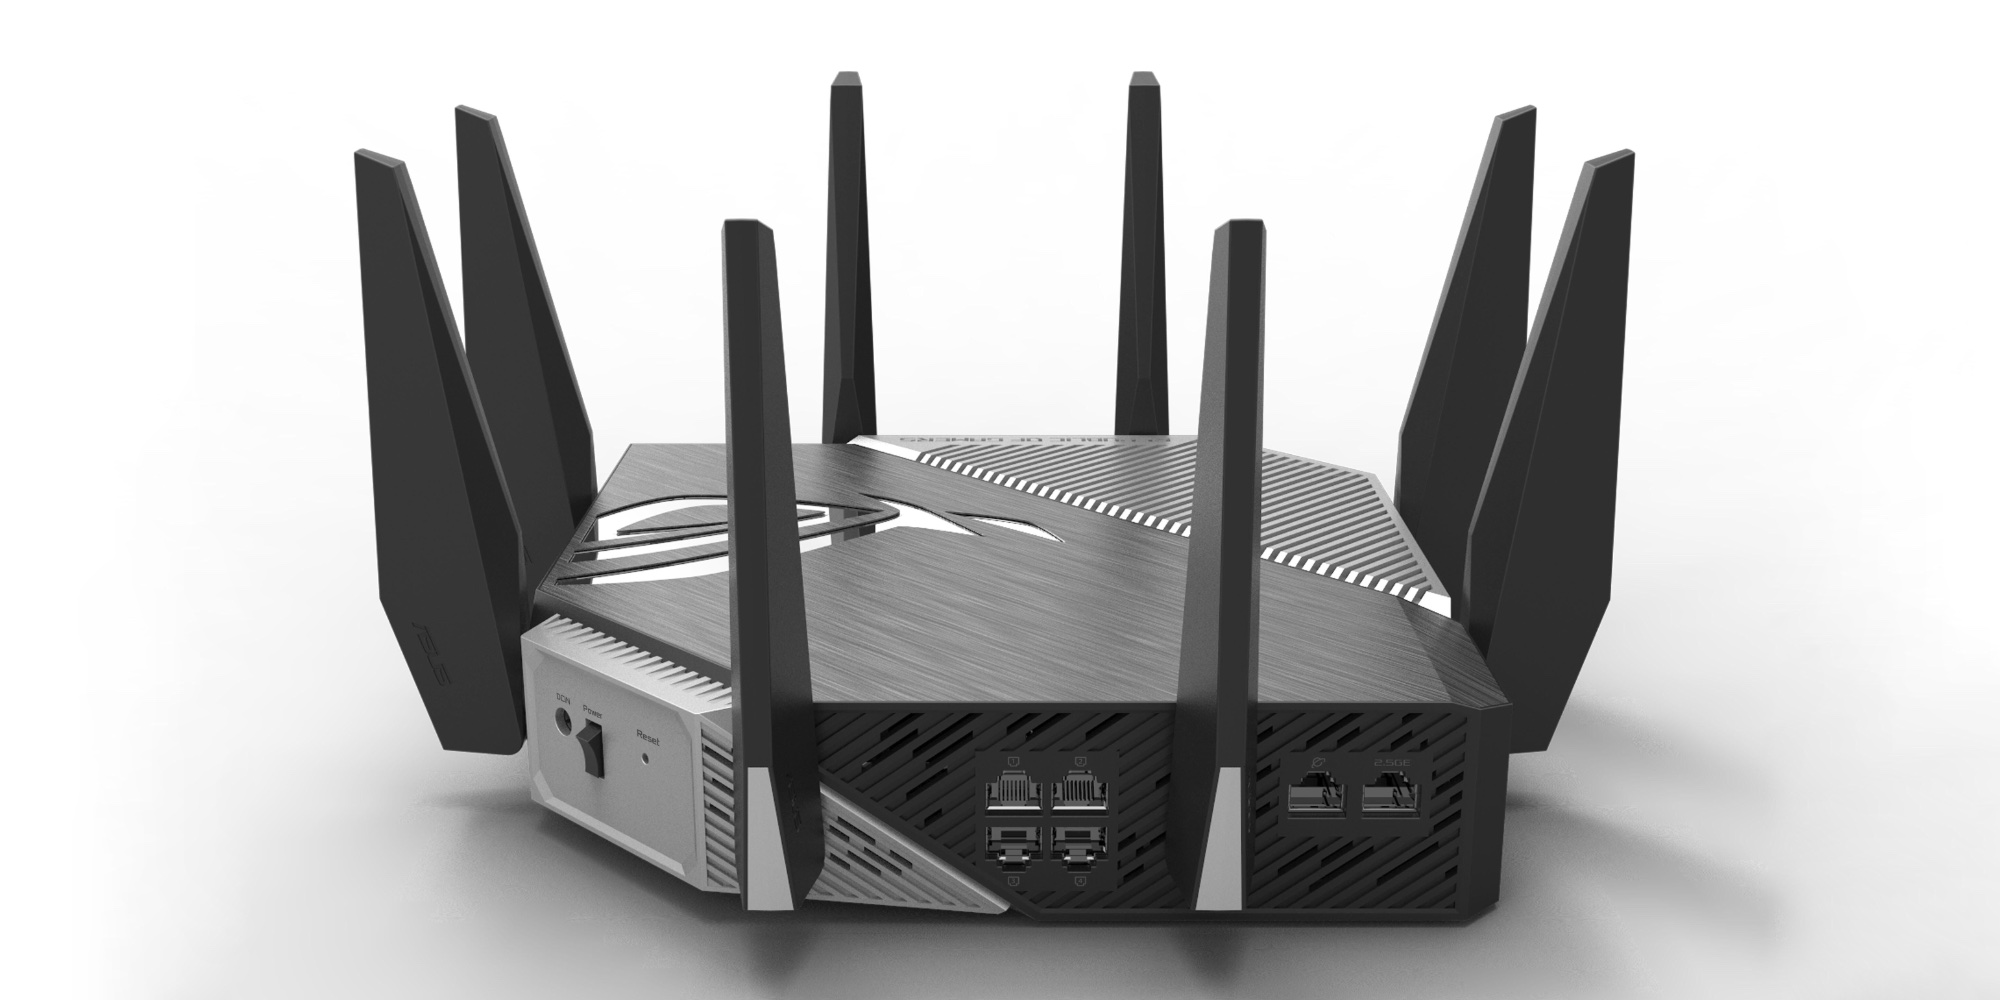 asus router block wired client